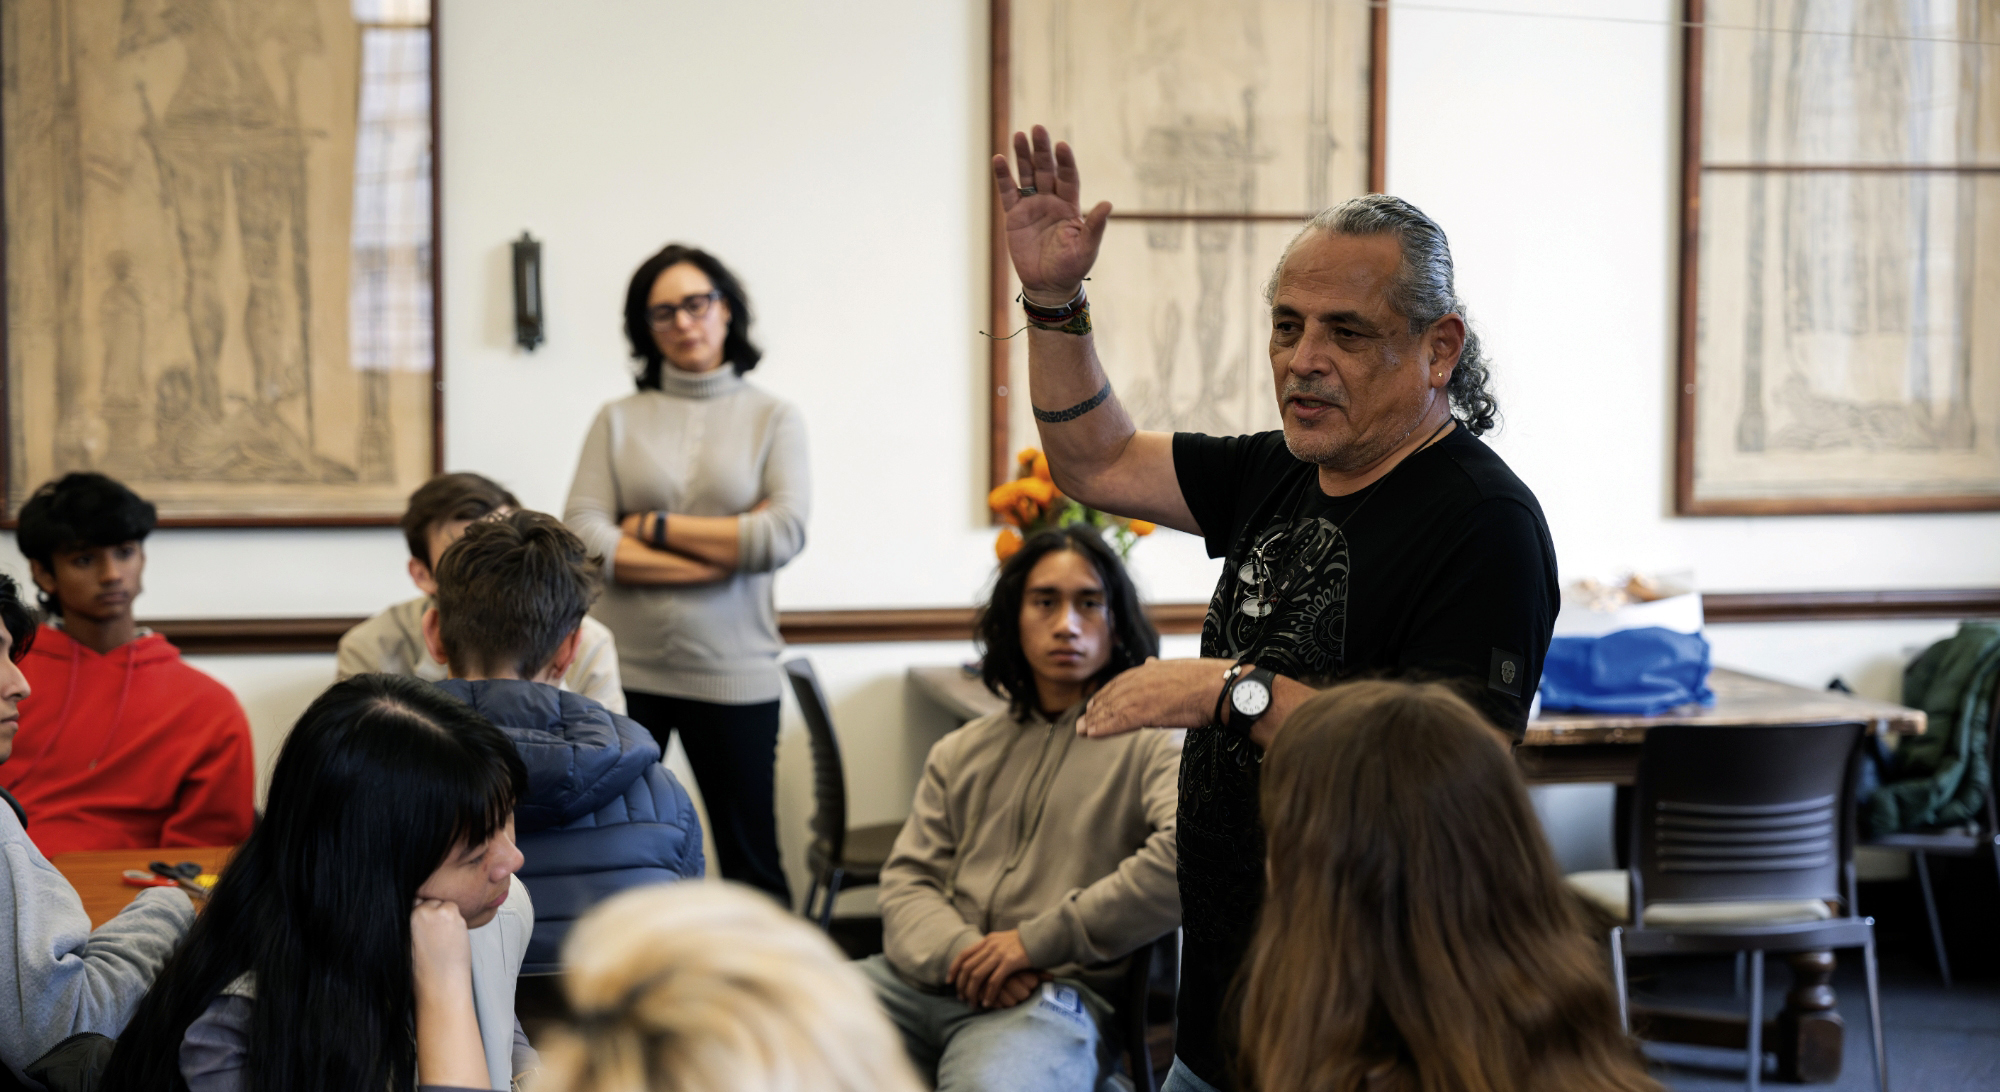 At a meeting of El Cafecito, Pilsen-based artist Ramón Marino explains, in Spanish, how to make traditional Day of the Dead crafts.